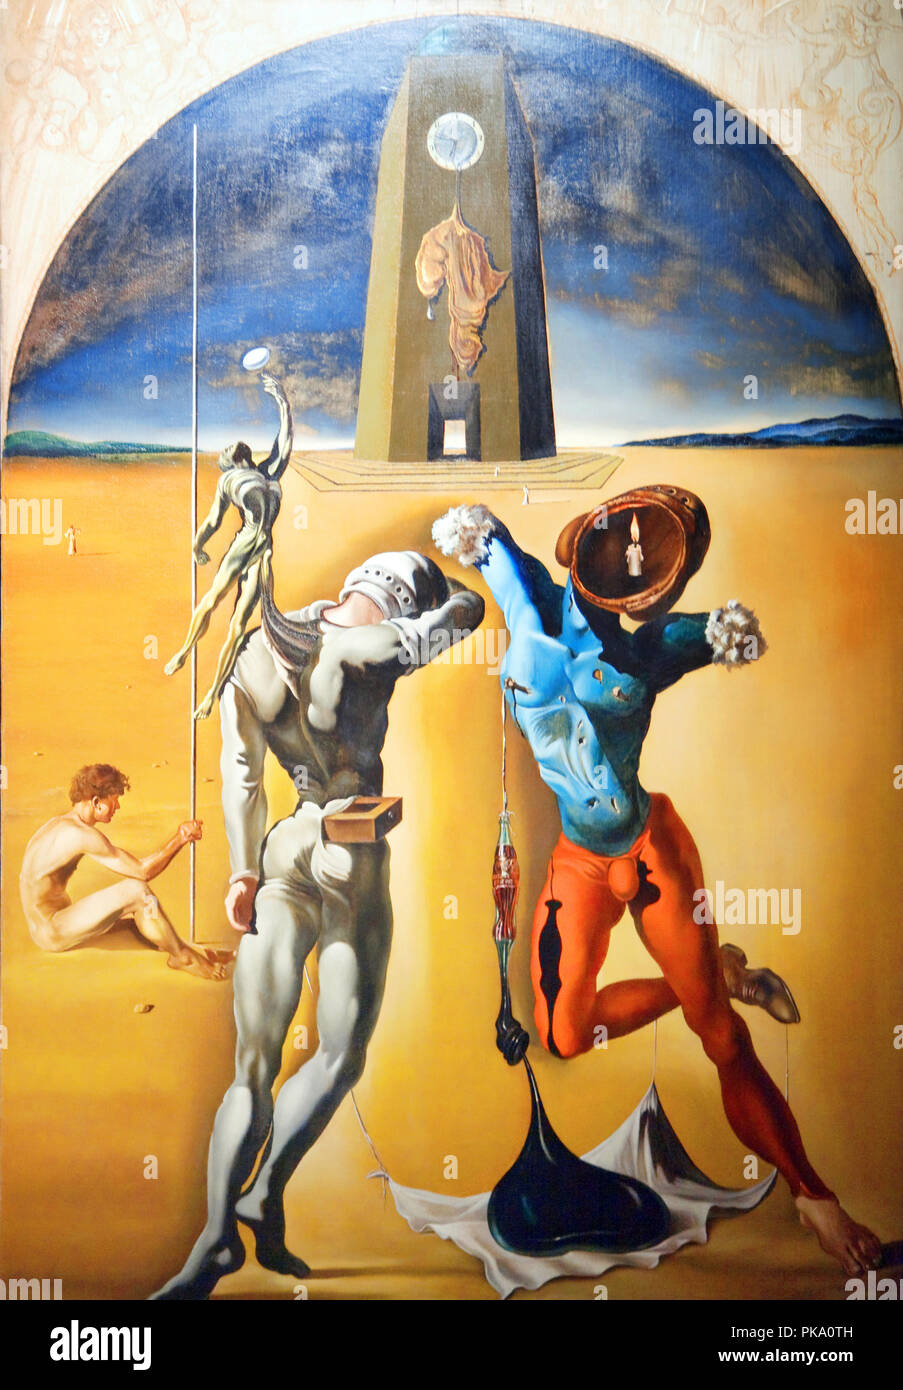 paintings in the house of dali in spain Stock Photo